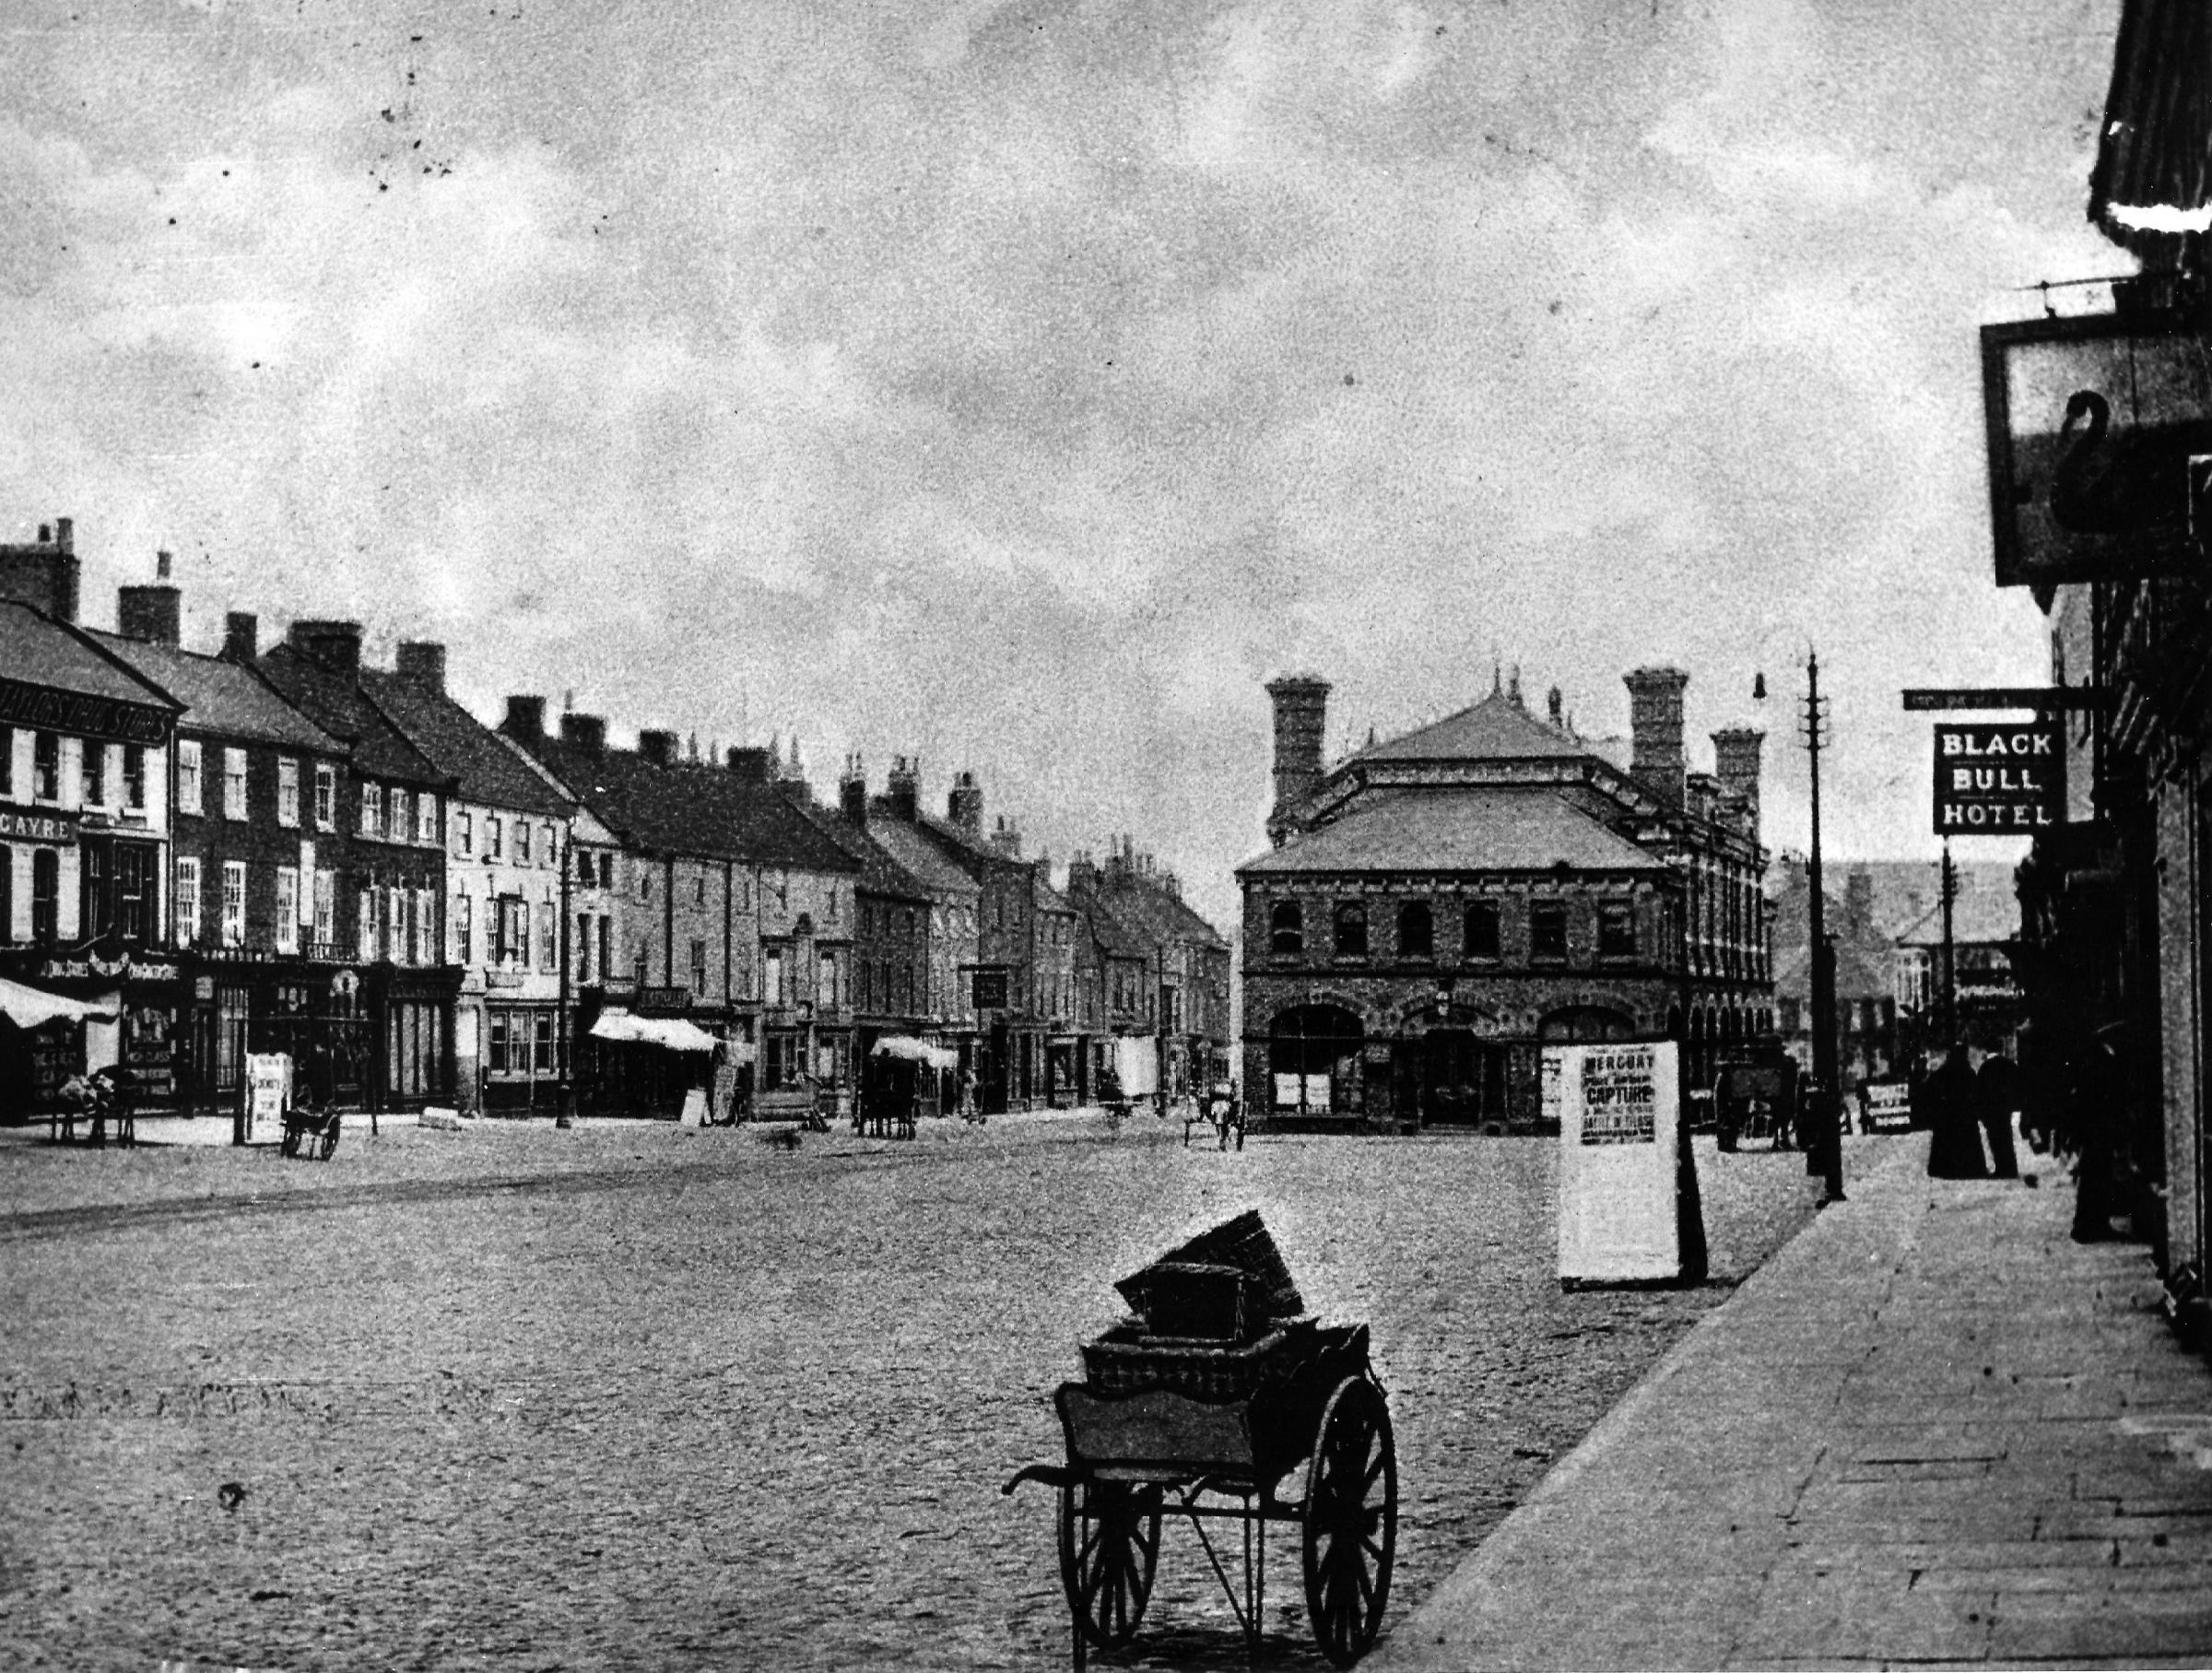 On the right hand side of Northallerton High Street is the Black Bull at No 101 - it received the first London to Edinburgh coach in 1785 - and is that the top of the crooked neck of the Black Swan, at No 104, on the inn sign closest to the camera